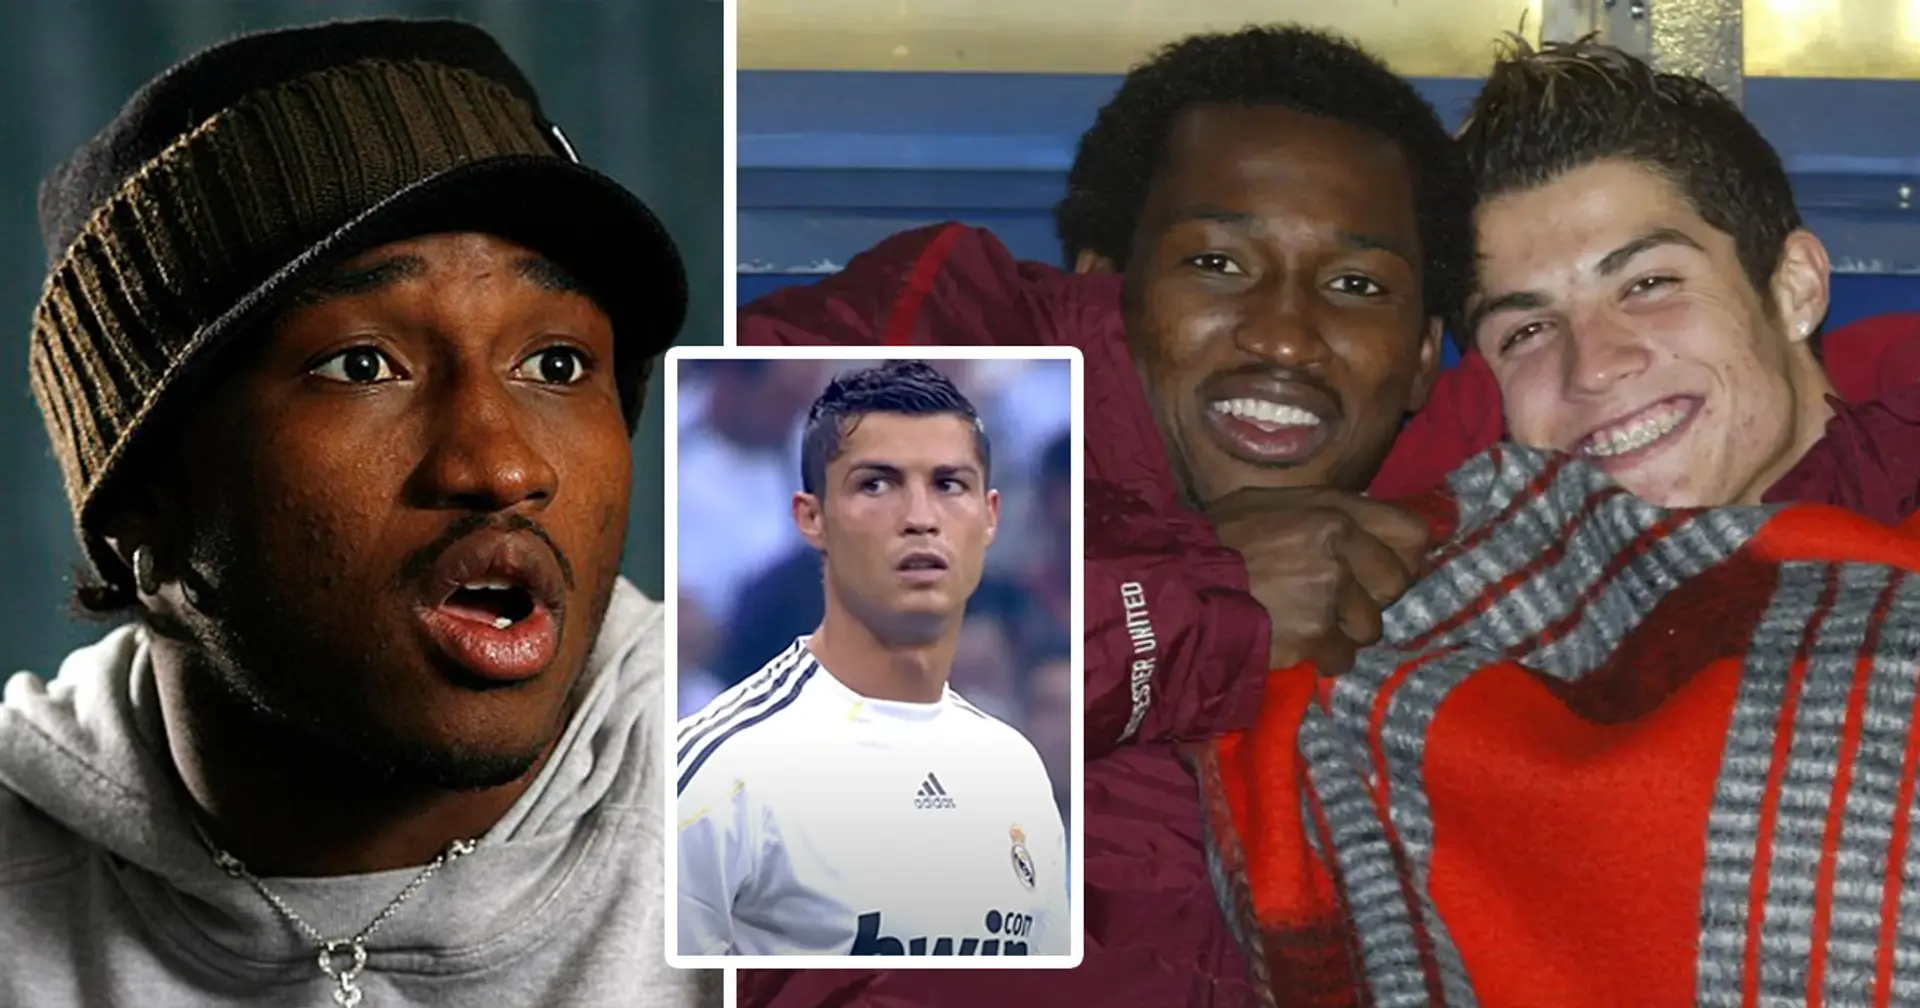 'My mum died in 2010 and he was there for me despite playing in Madrid': Cristiano Ronaldo's genuine self as told by ex-teammate Eric Djemba-Djemba